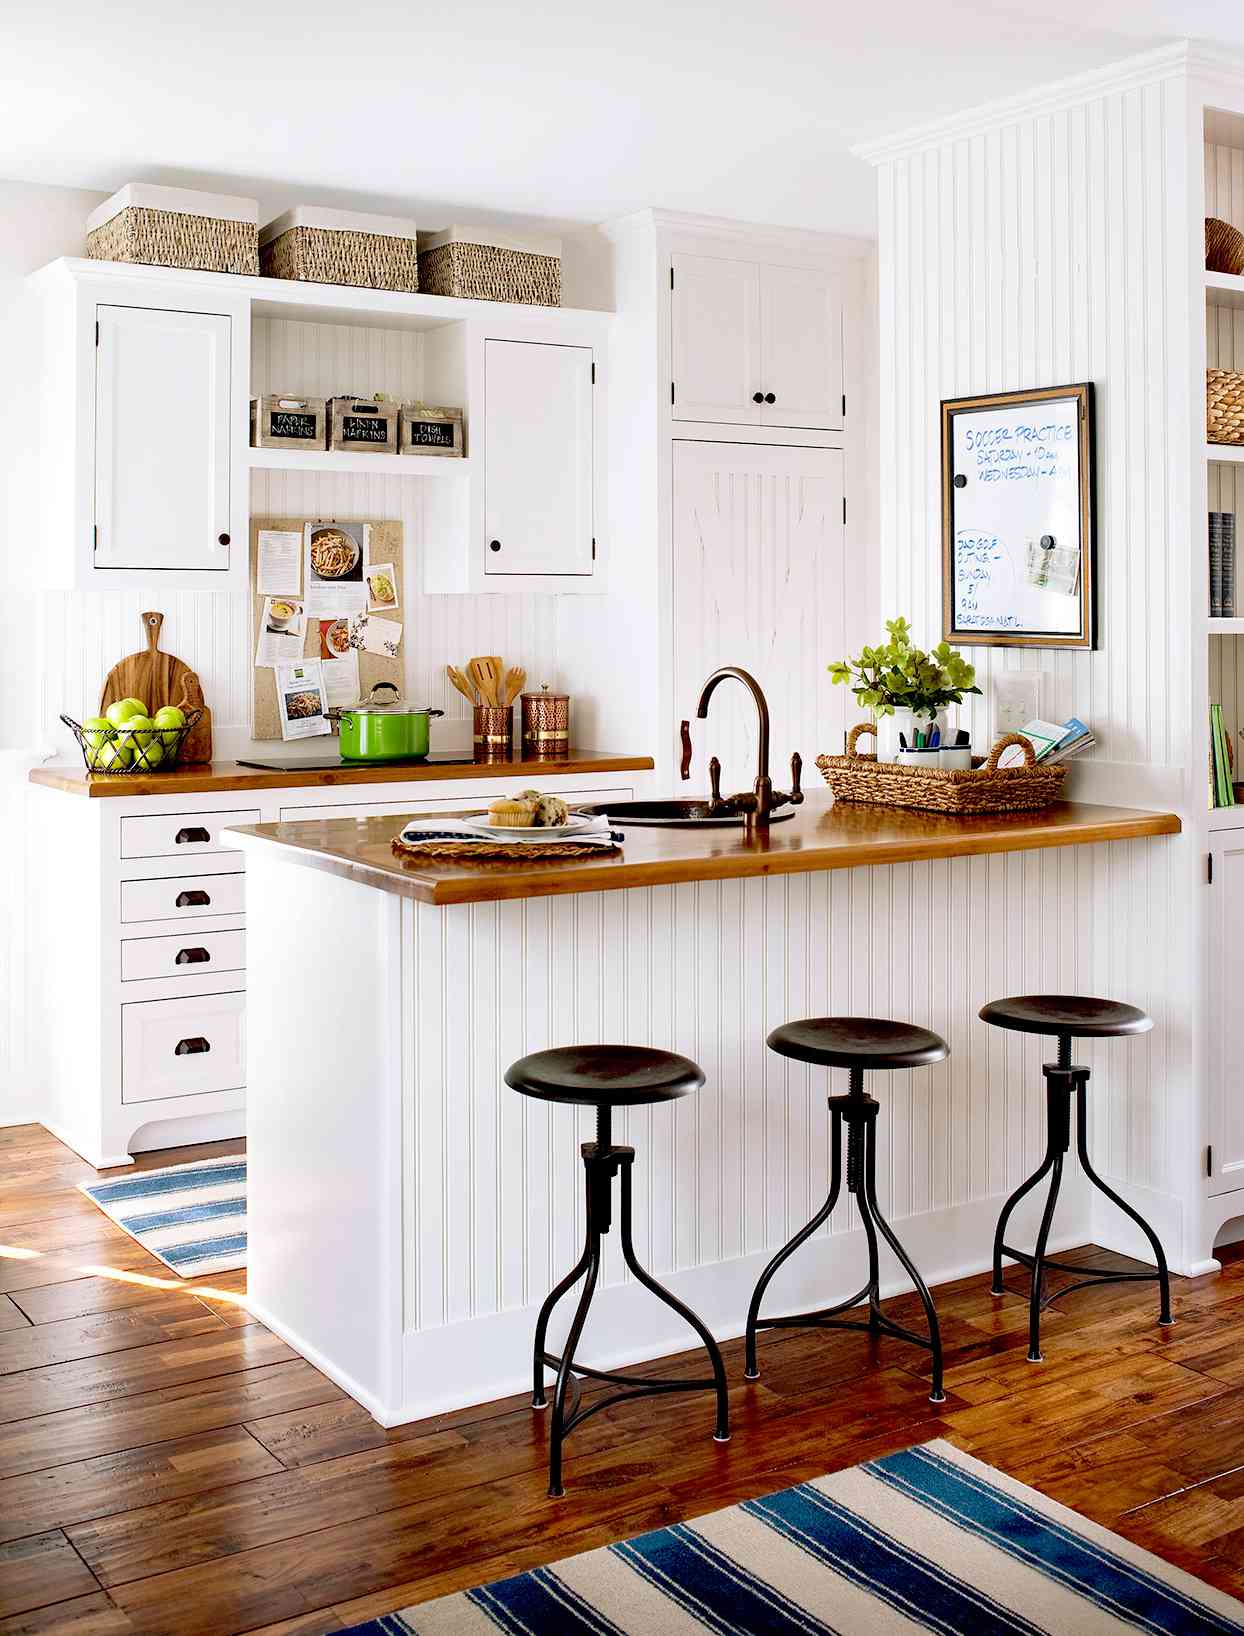 White kitchen with bar seating and stools